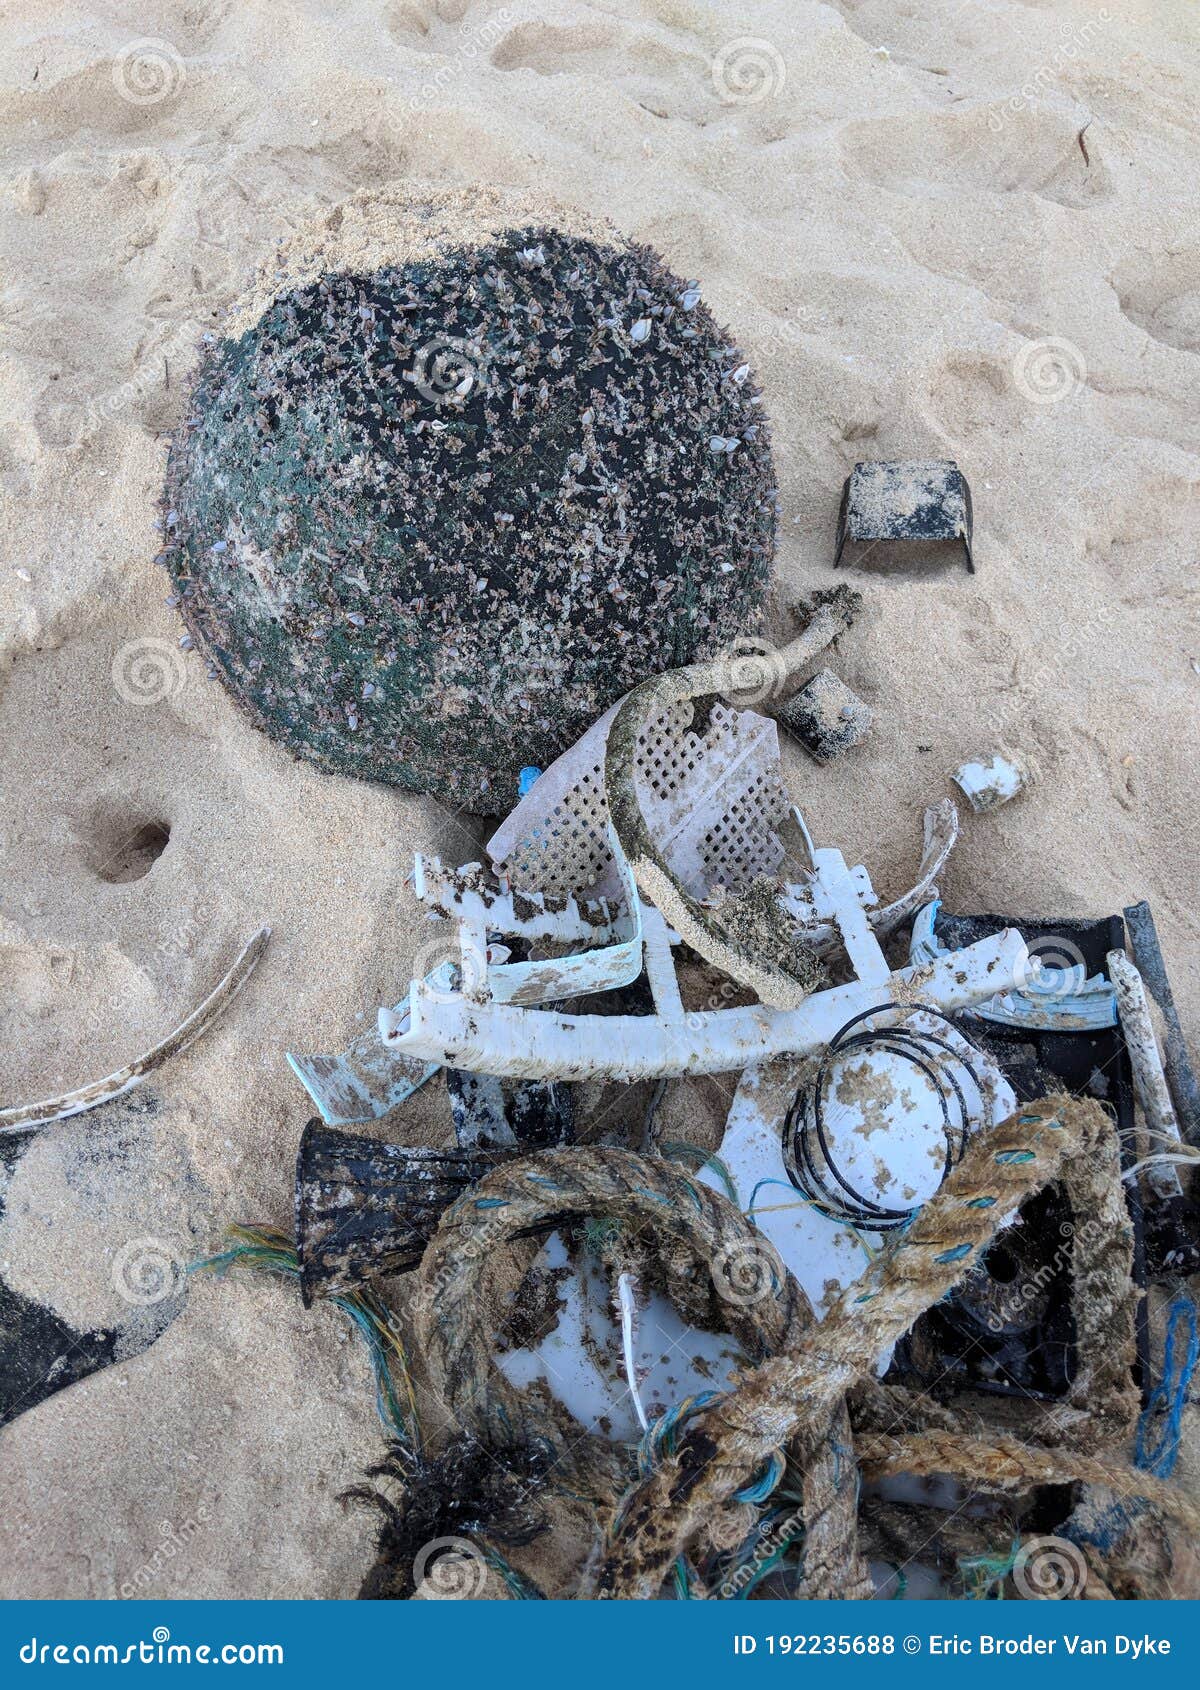 Bundle of Plastic Buoy, Fishing Nets, Lines, and Other Trash Washes Up on  Beach Stock Photo - Image of blue, rope: 192235688